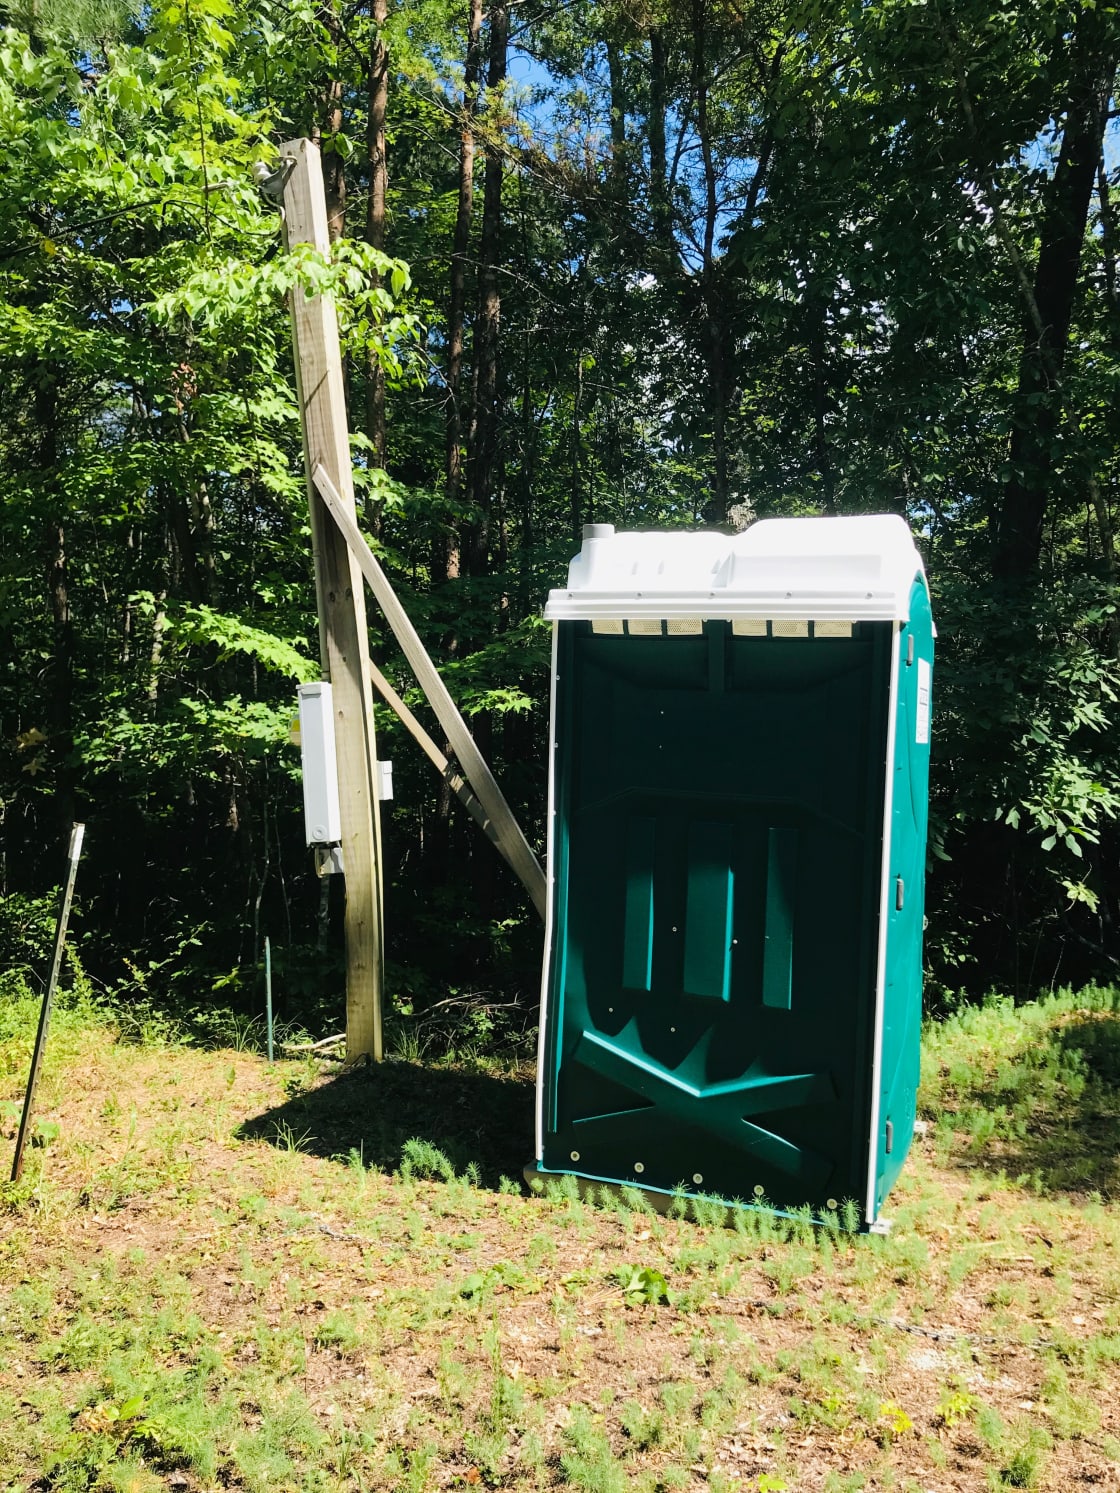 Electricity and portable toilet provided